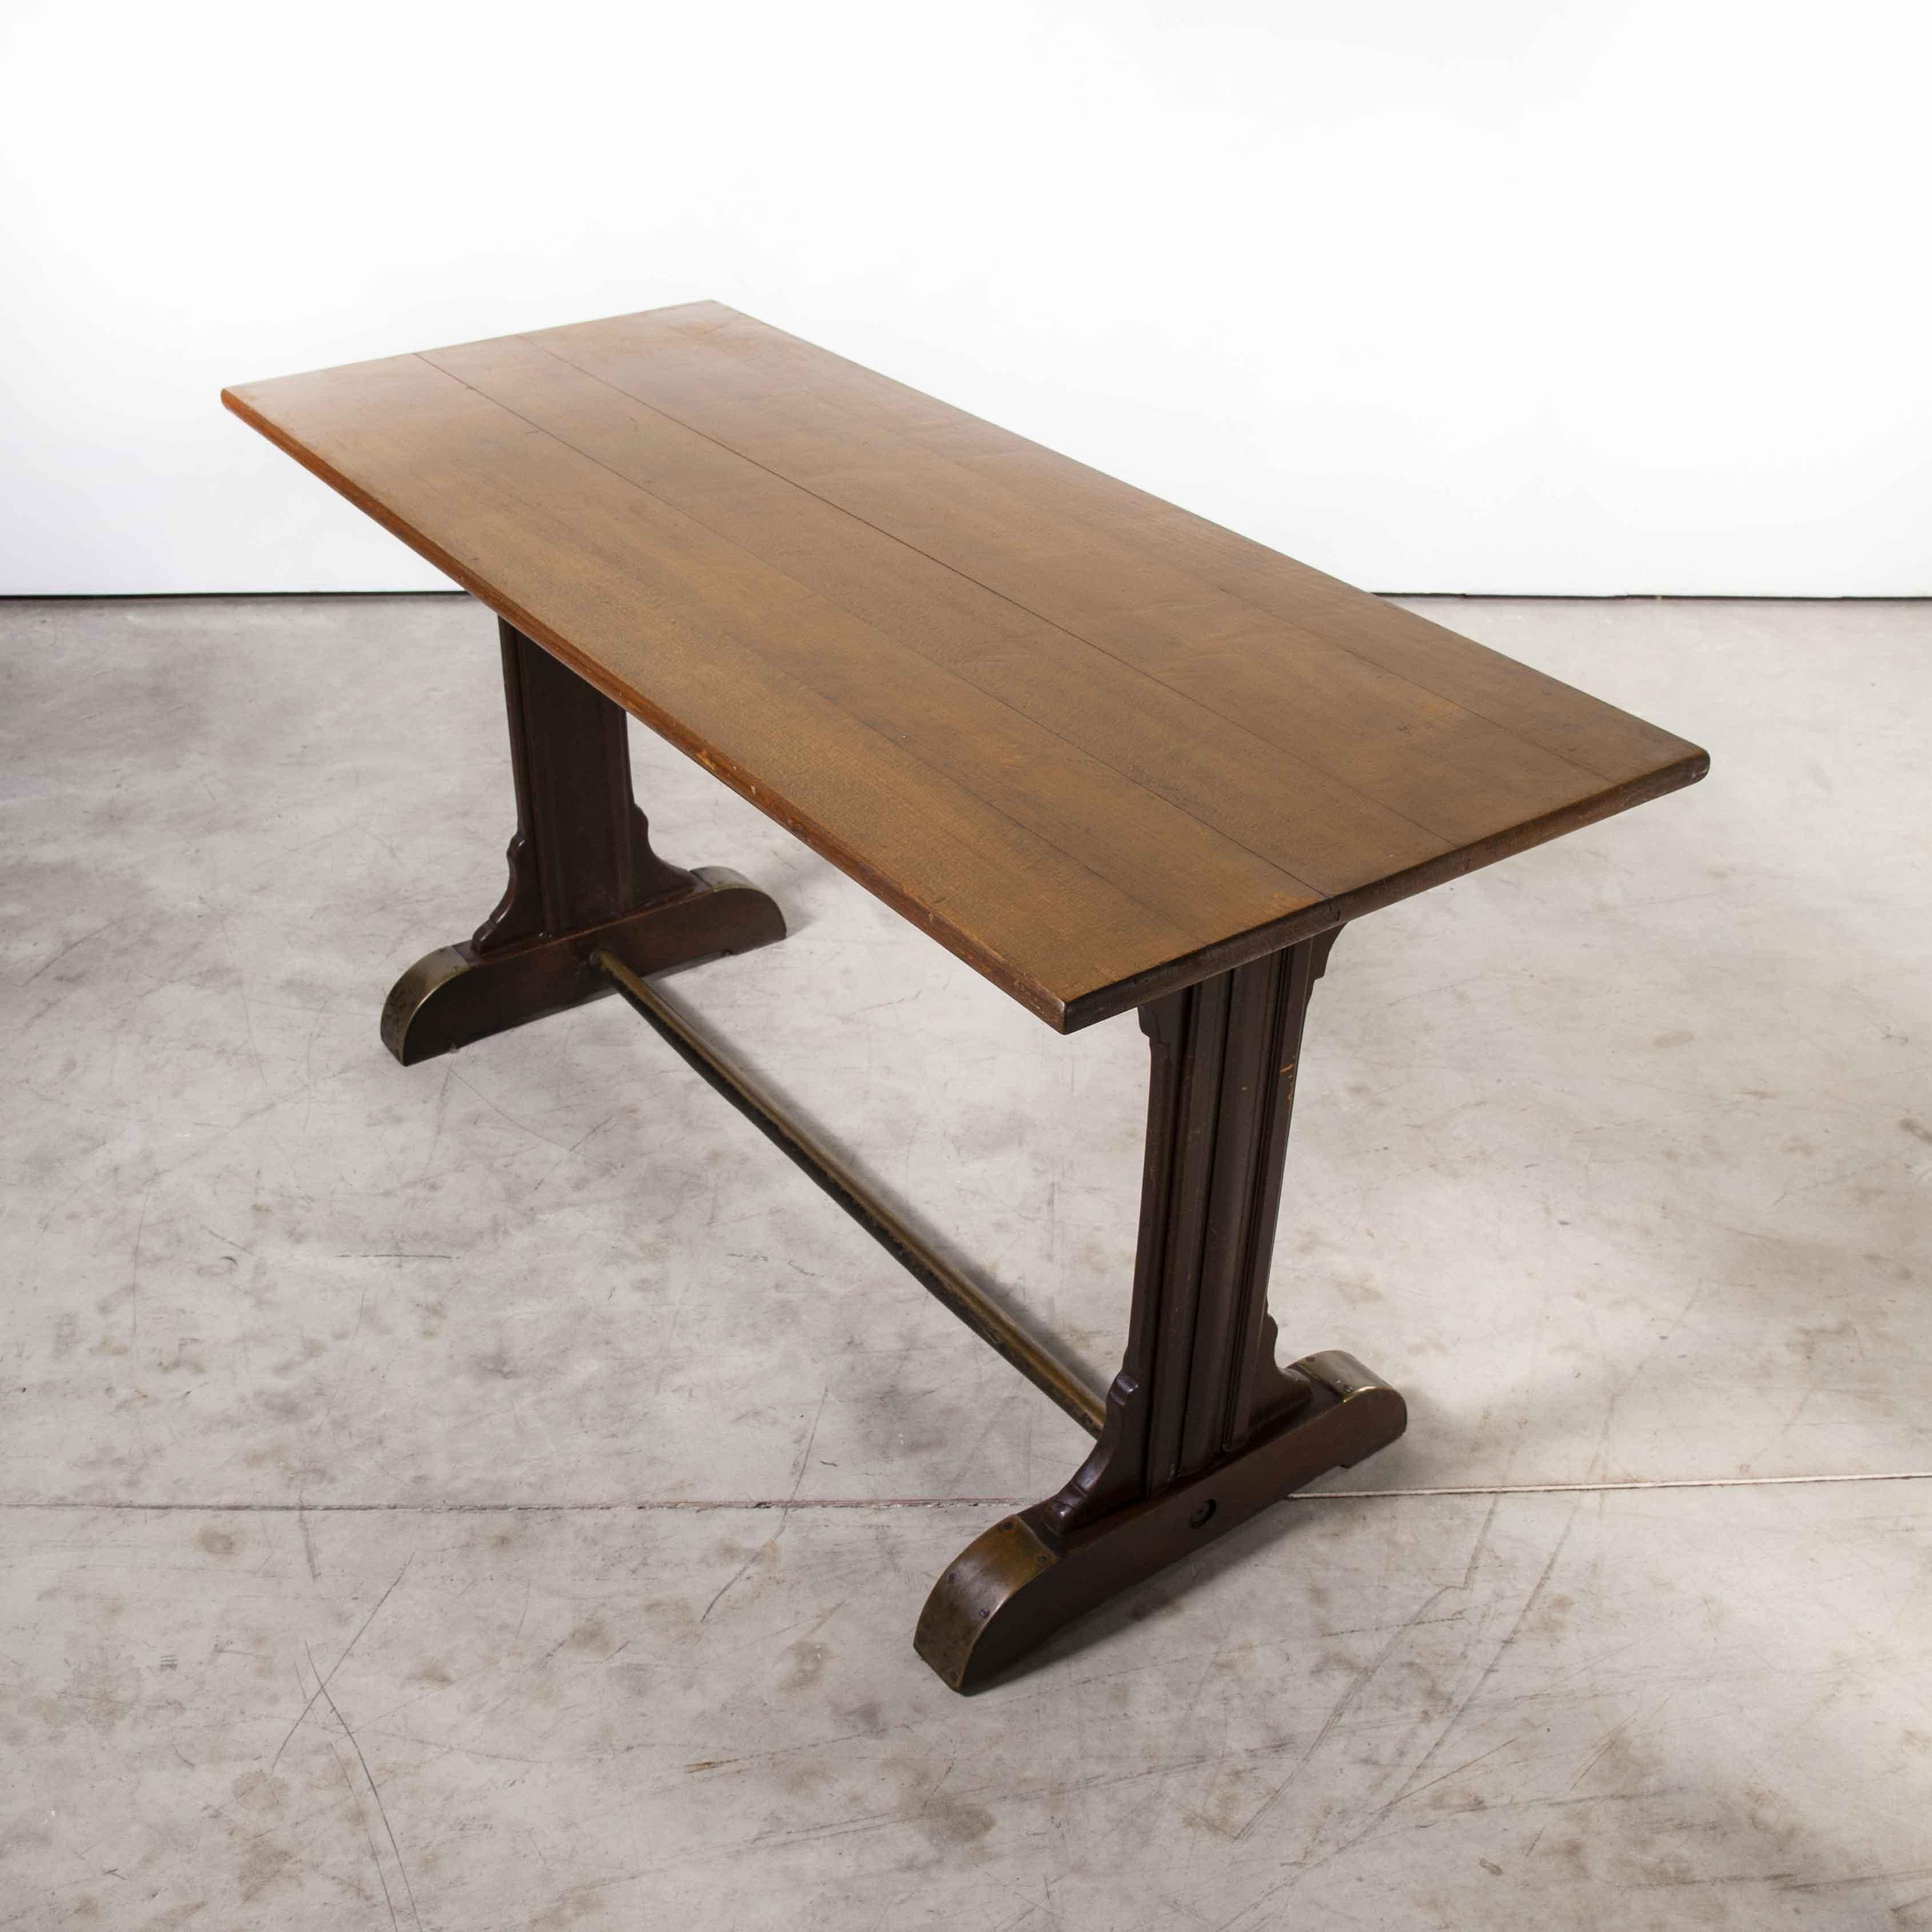 1930's Original French Café Table, Rectangular Dining Table 'Model 1114.1' For Sale 7